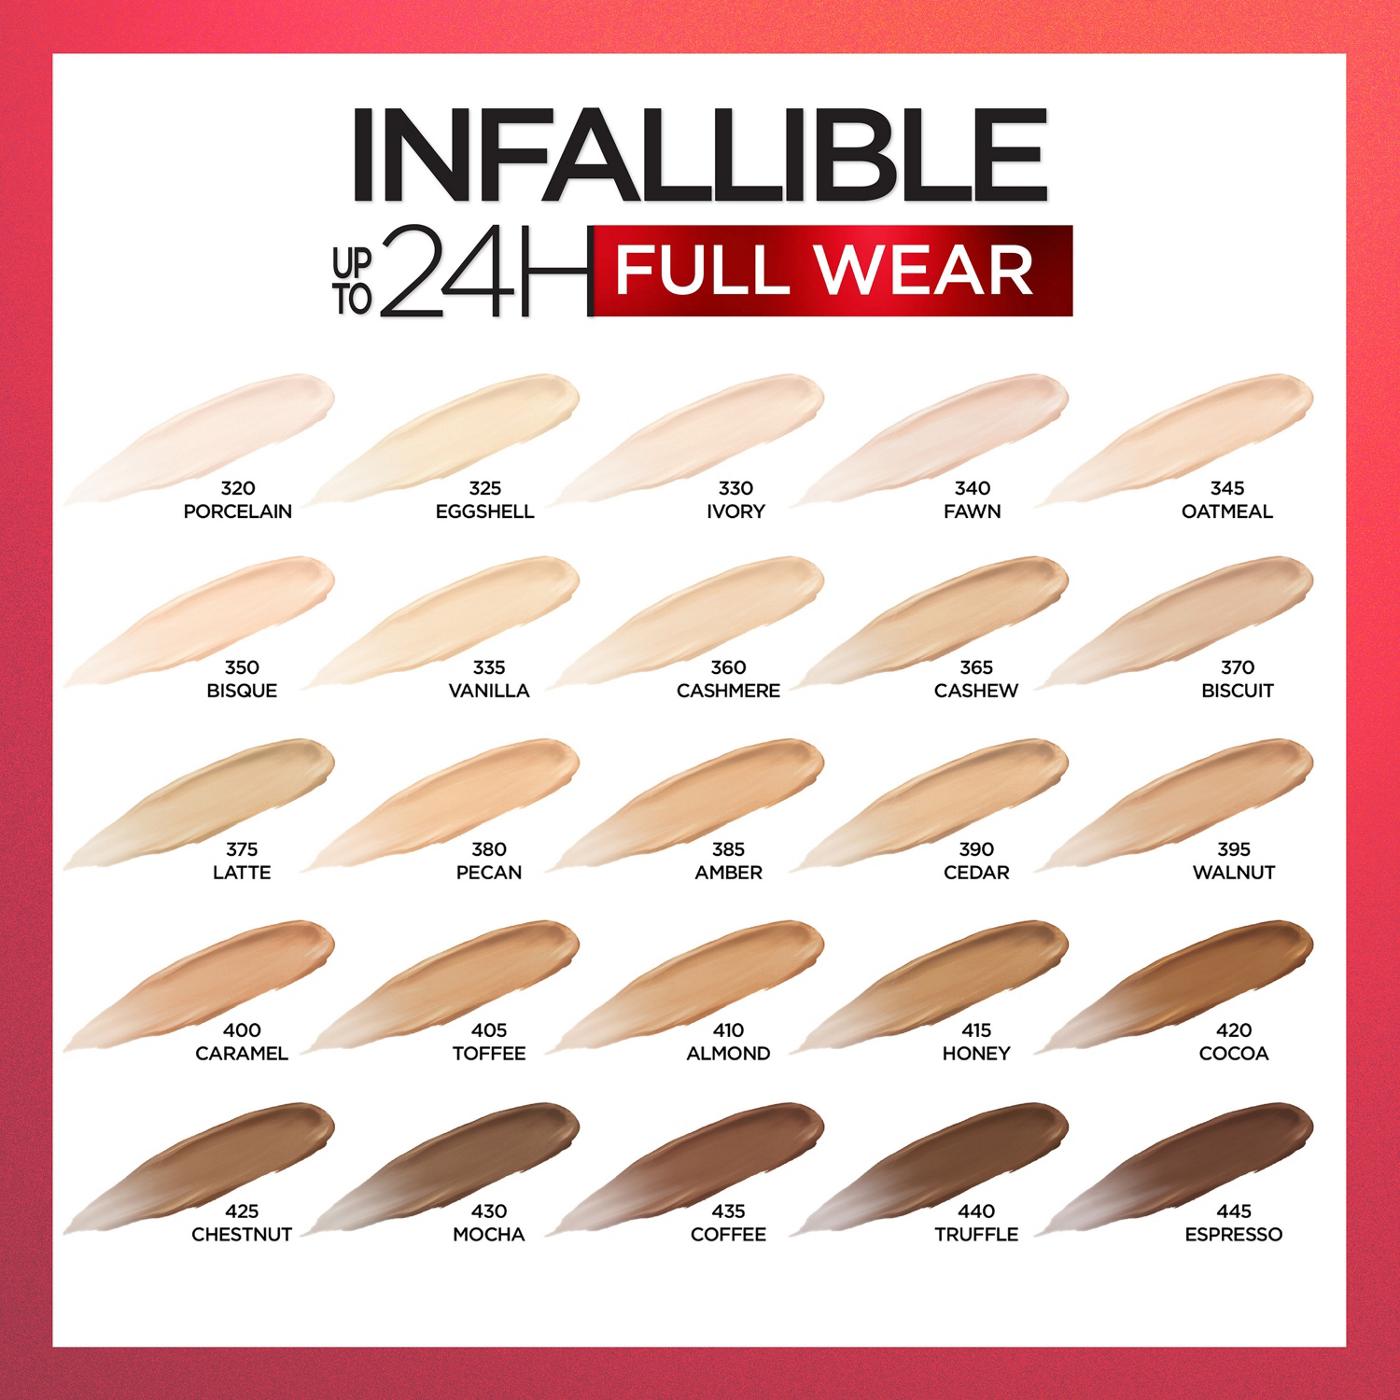 L'Oréal Paris Infallible Full Wear Concealer up to 24H Full Coverage Toffee; image 5 of 8